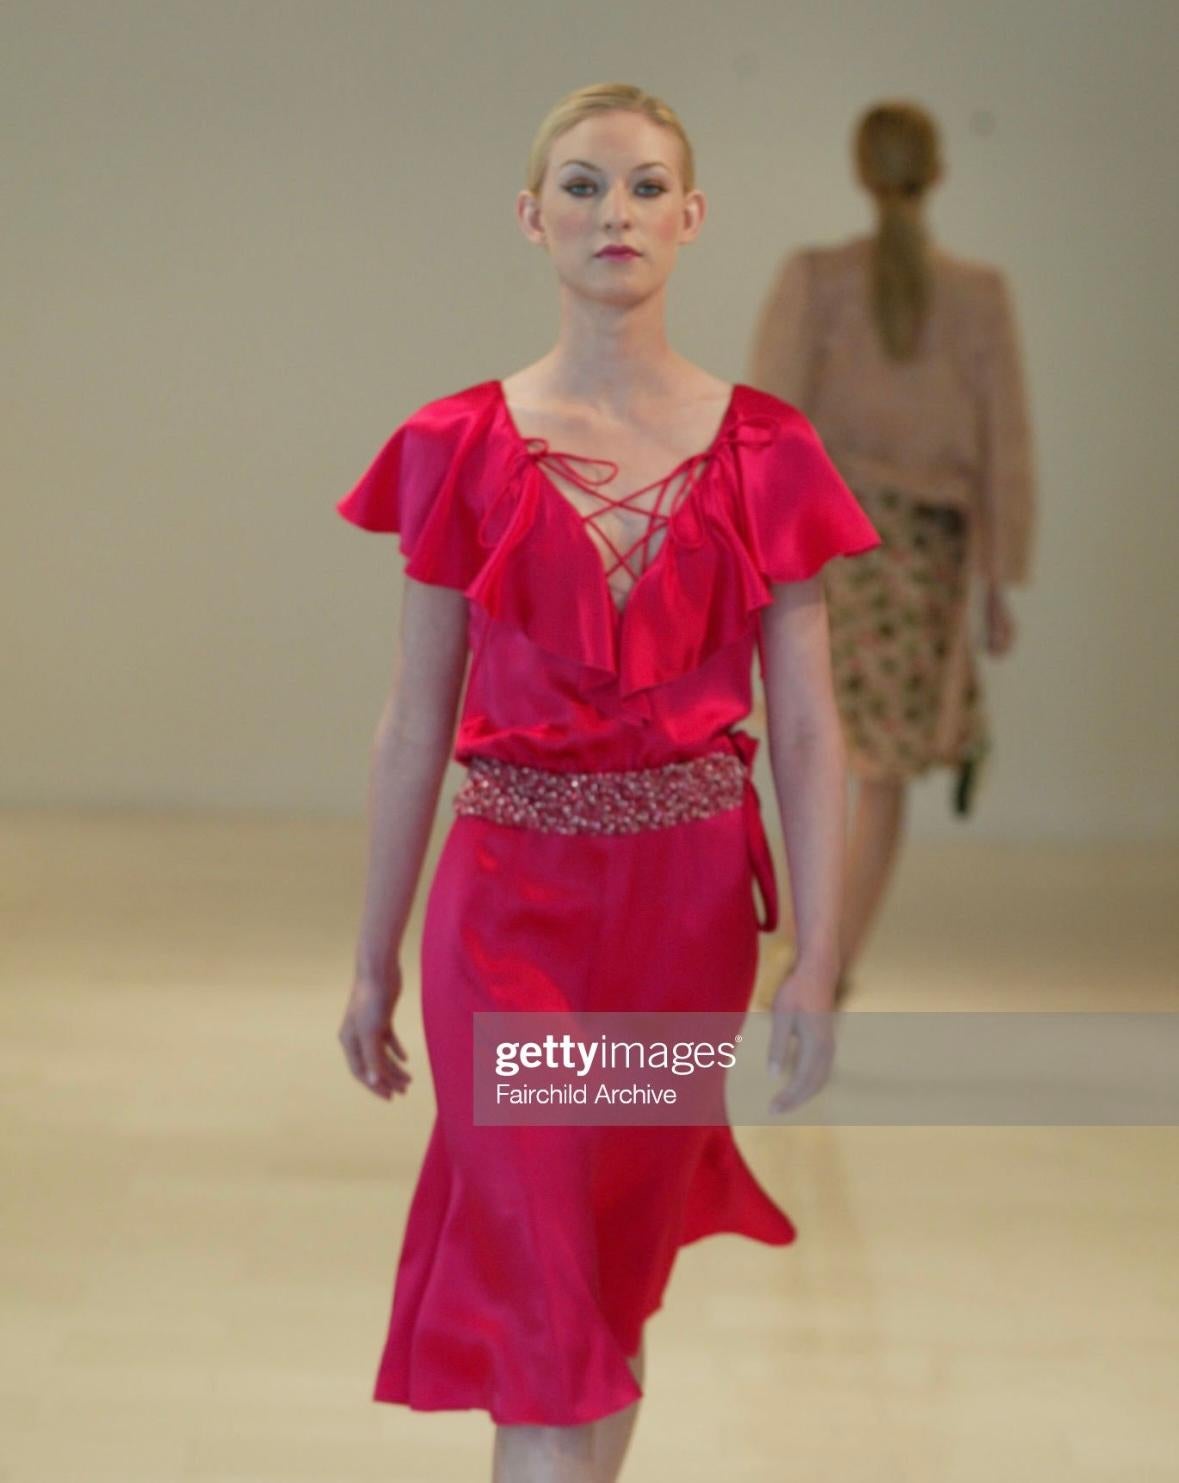 Presenting a beautiful pink silk satin ruffle dress designed by Valentino Garavani for his Resort 2004 collection. This fabulous dress is constructed entirely of silk satin, and features ruffled petal sleeves, a plunging neckline with lace-up